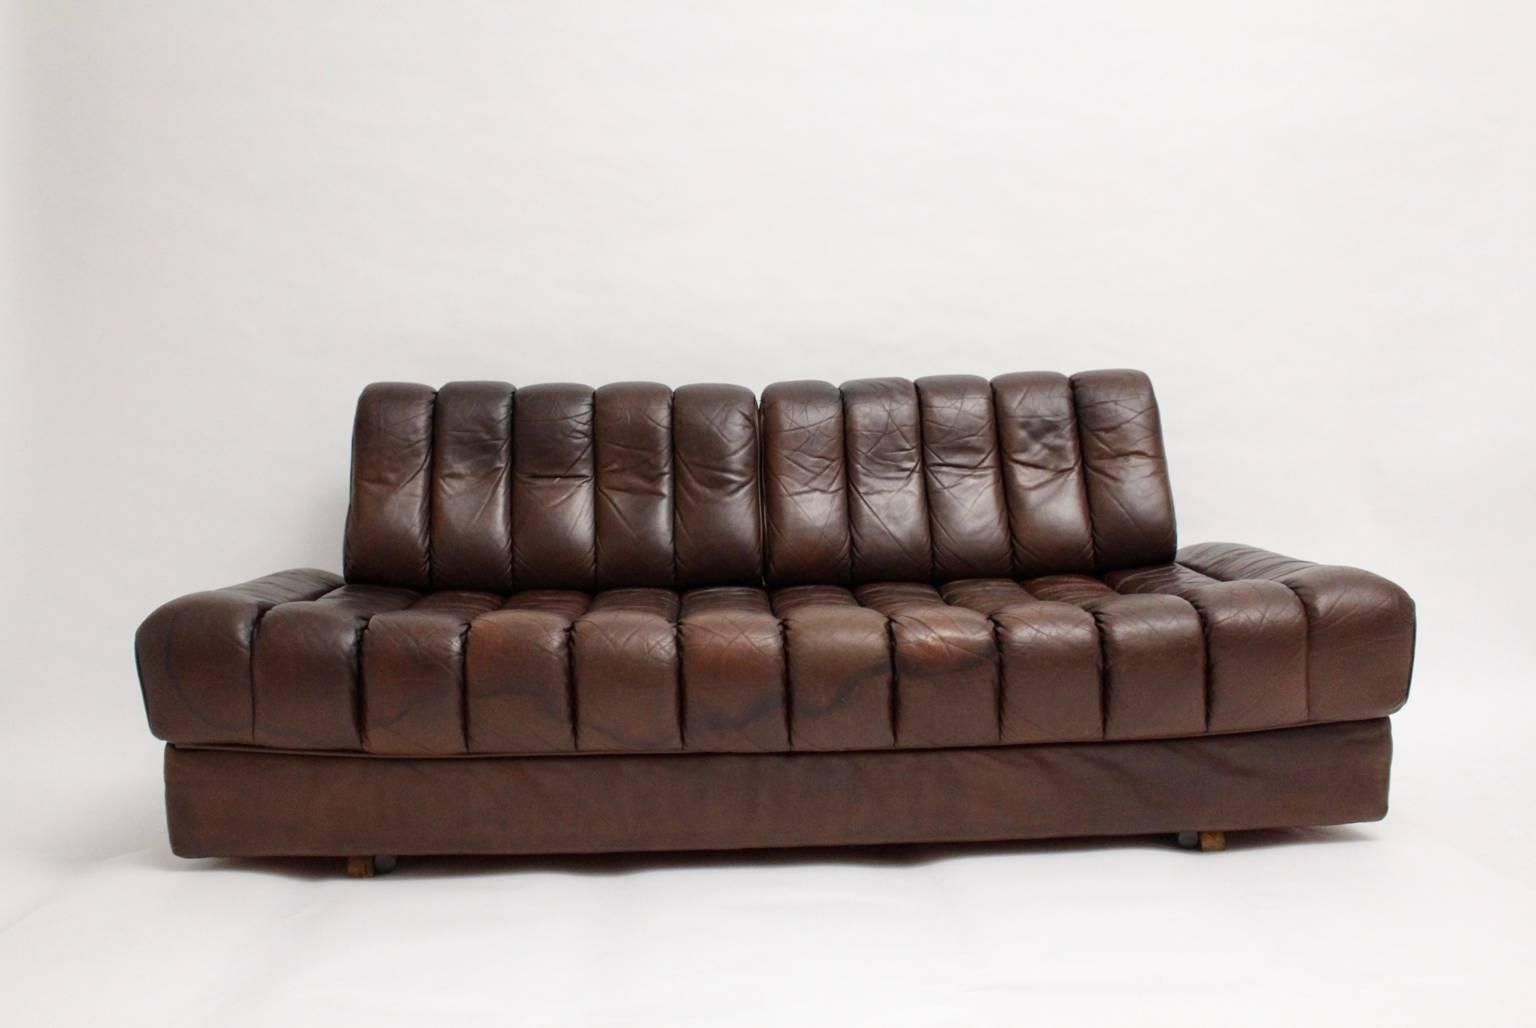 Swiss De Sede DS 85 Brown Leather Daybed or Sofa 1970s, Switzerland